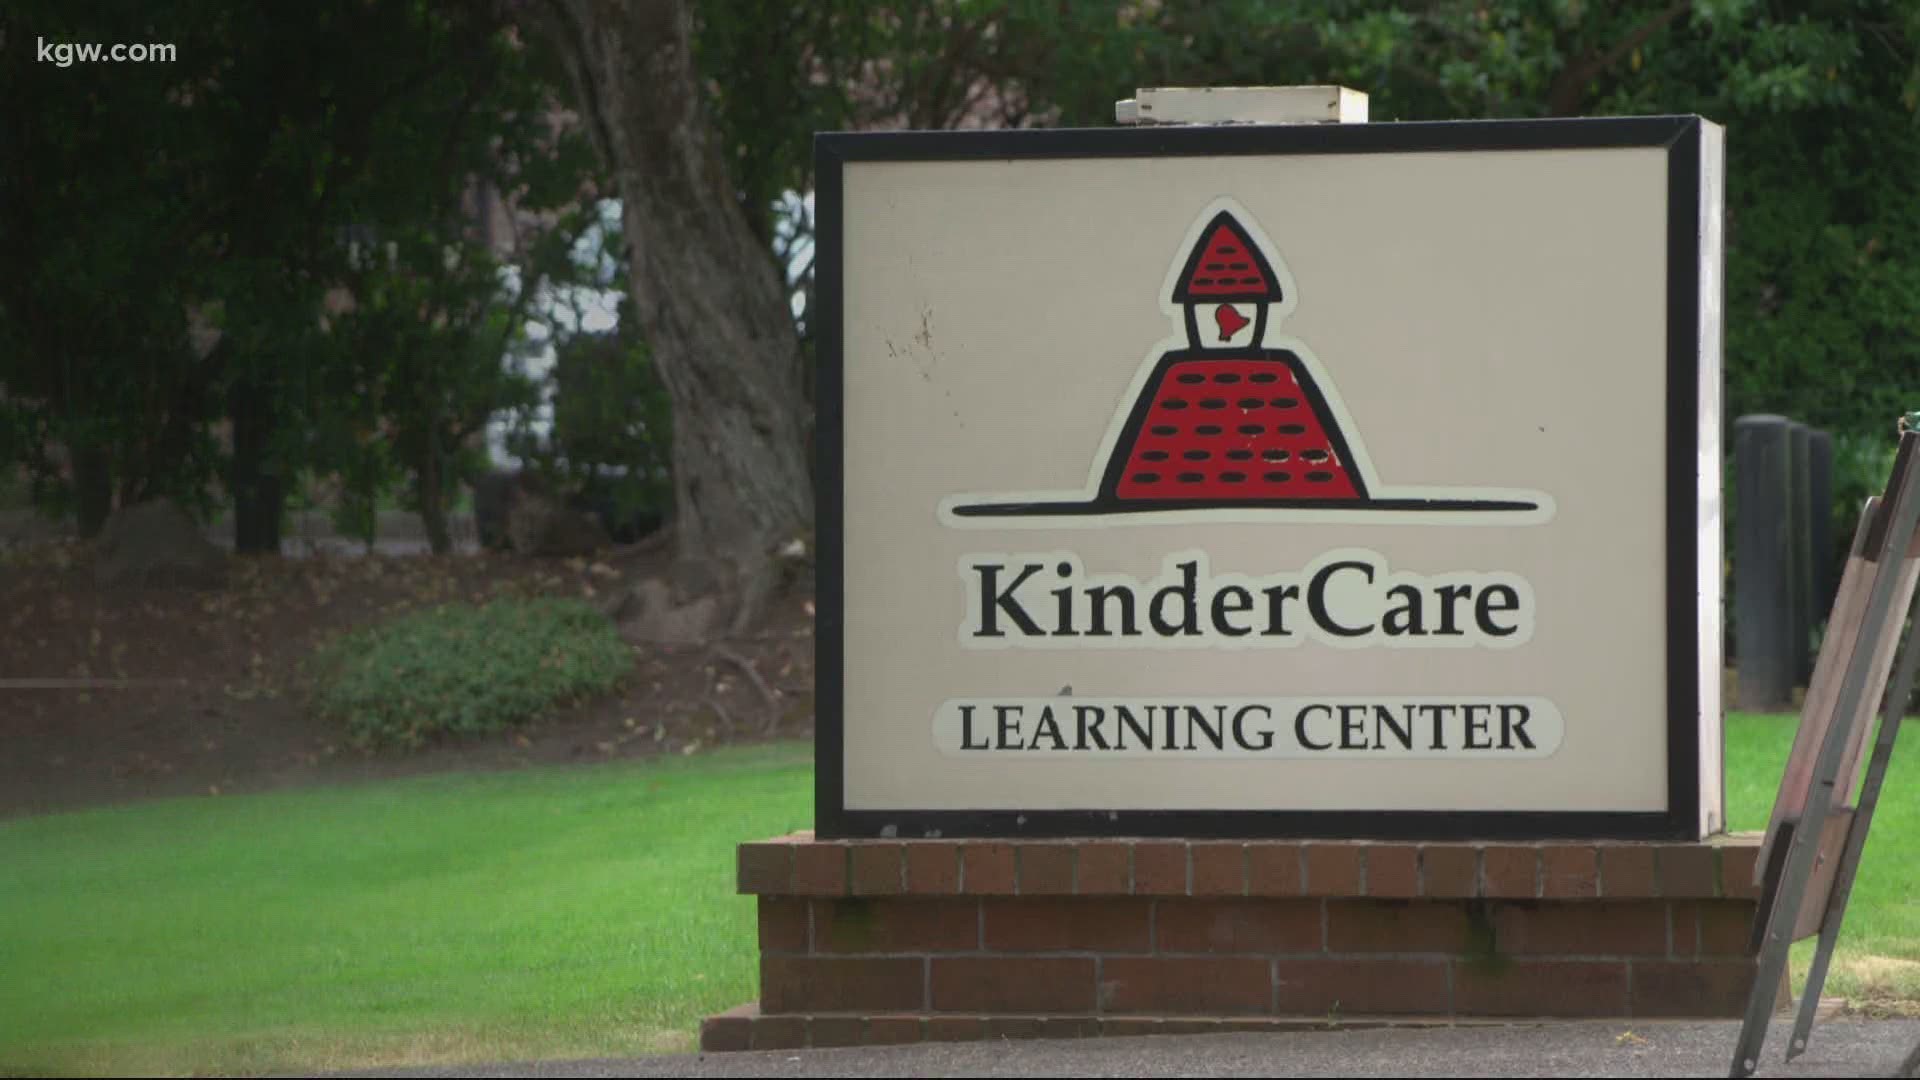 Parents told Cristin Severance it took too long for contact tracers to call them after an outbreak closed the KinderCare in Lake Oswego.